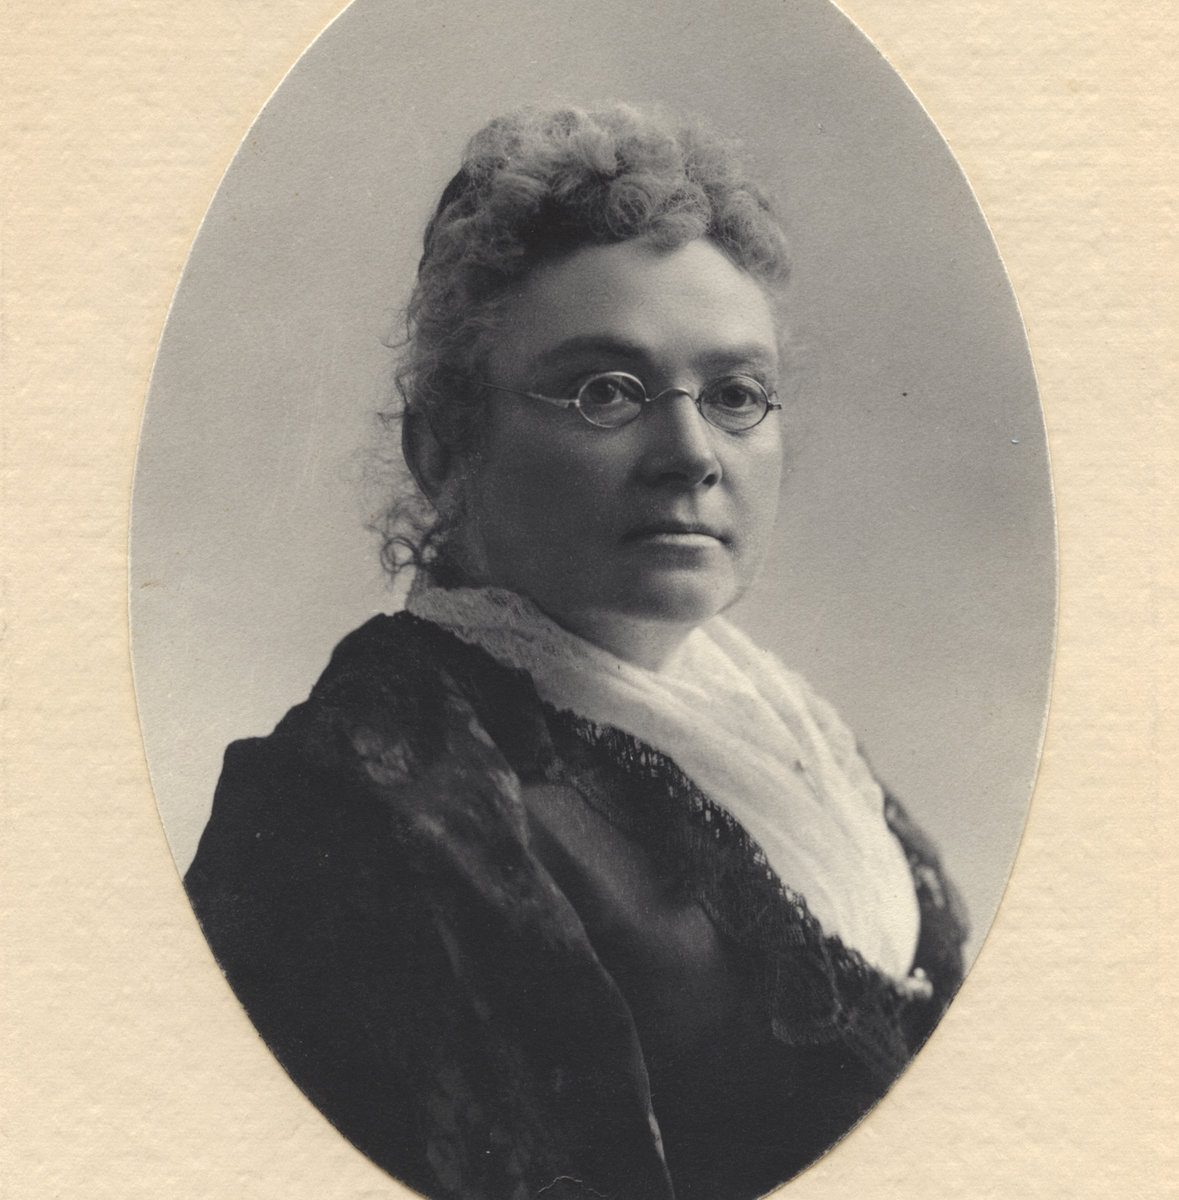 Dr. Emily Stowe